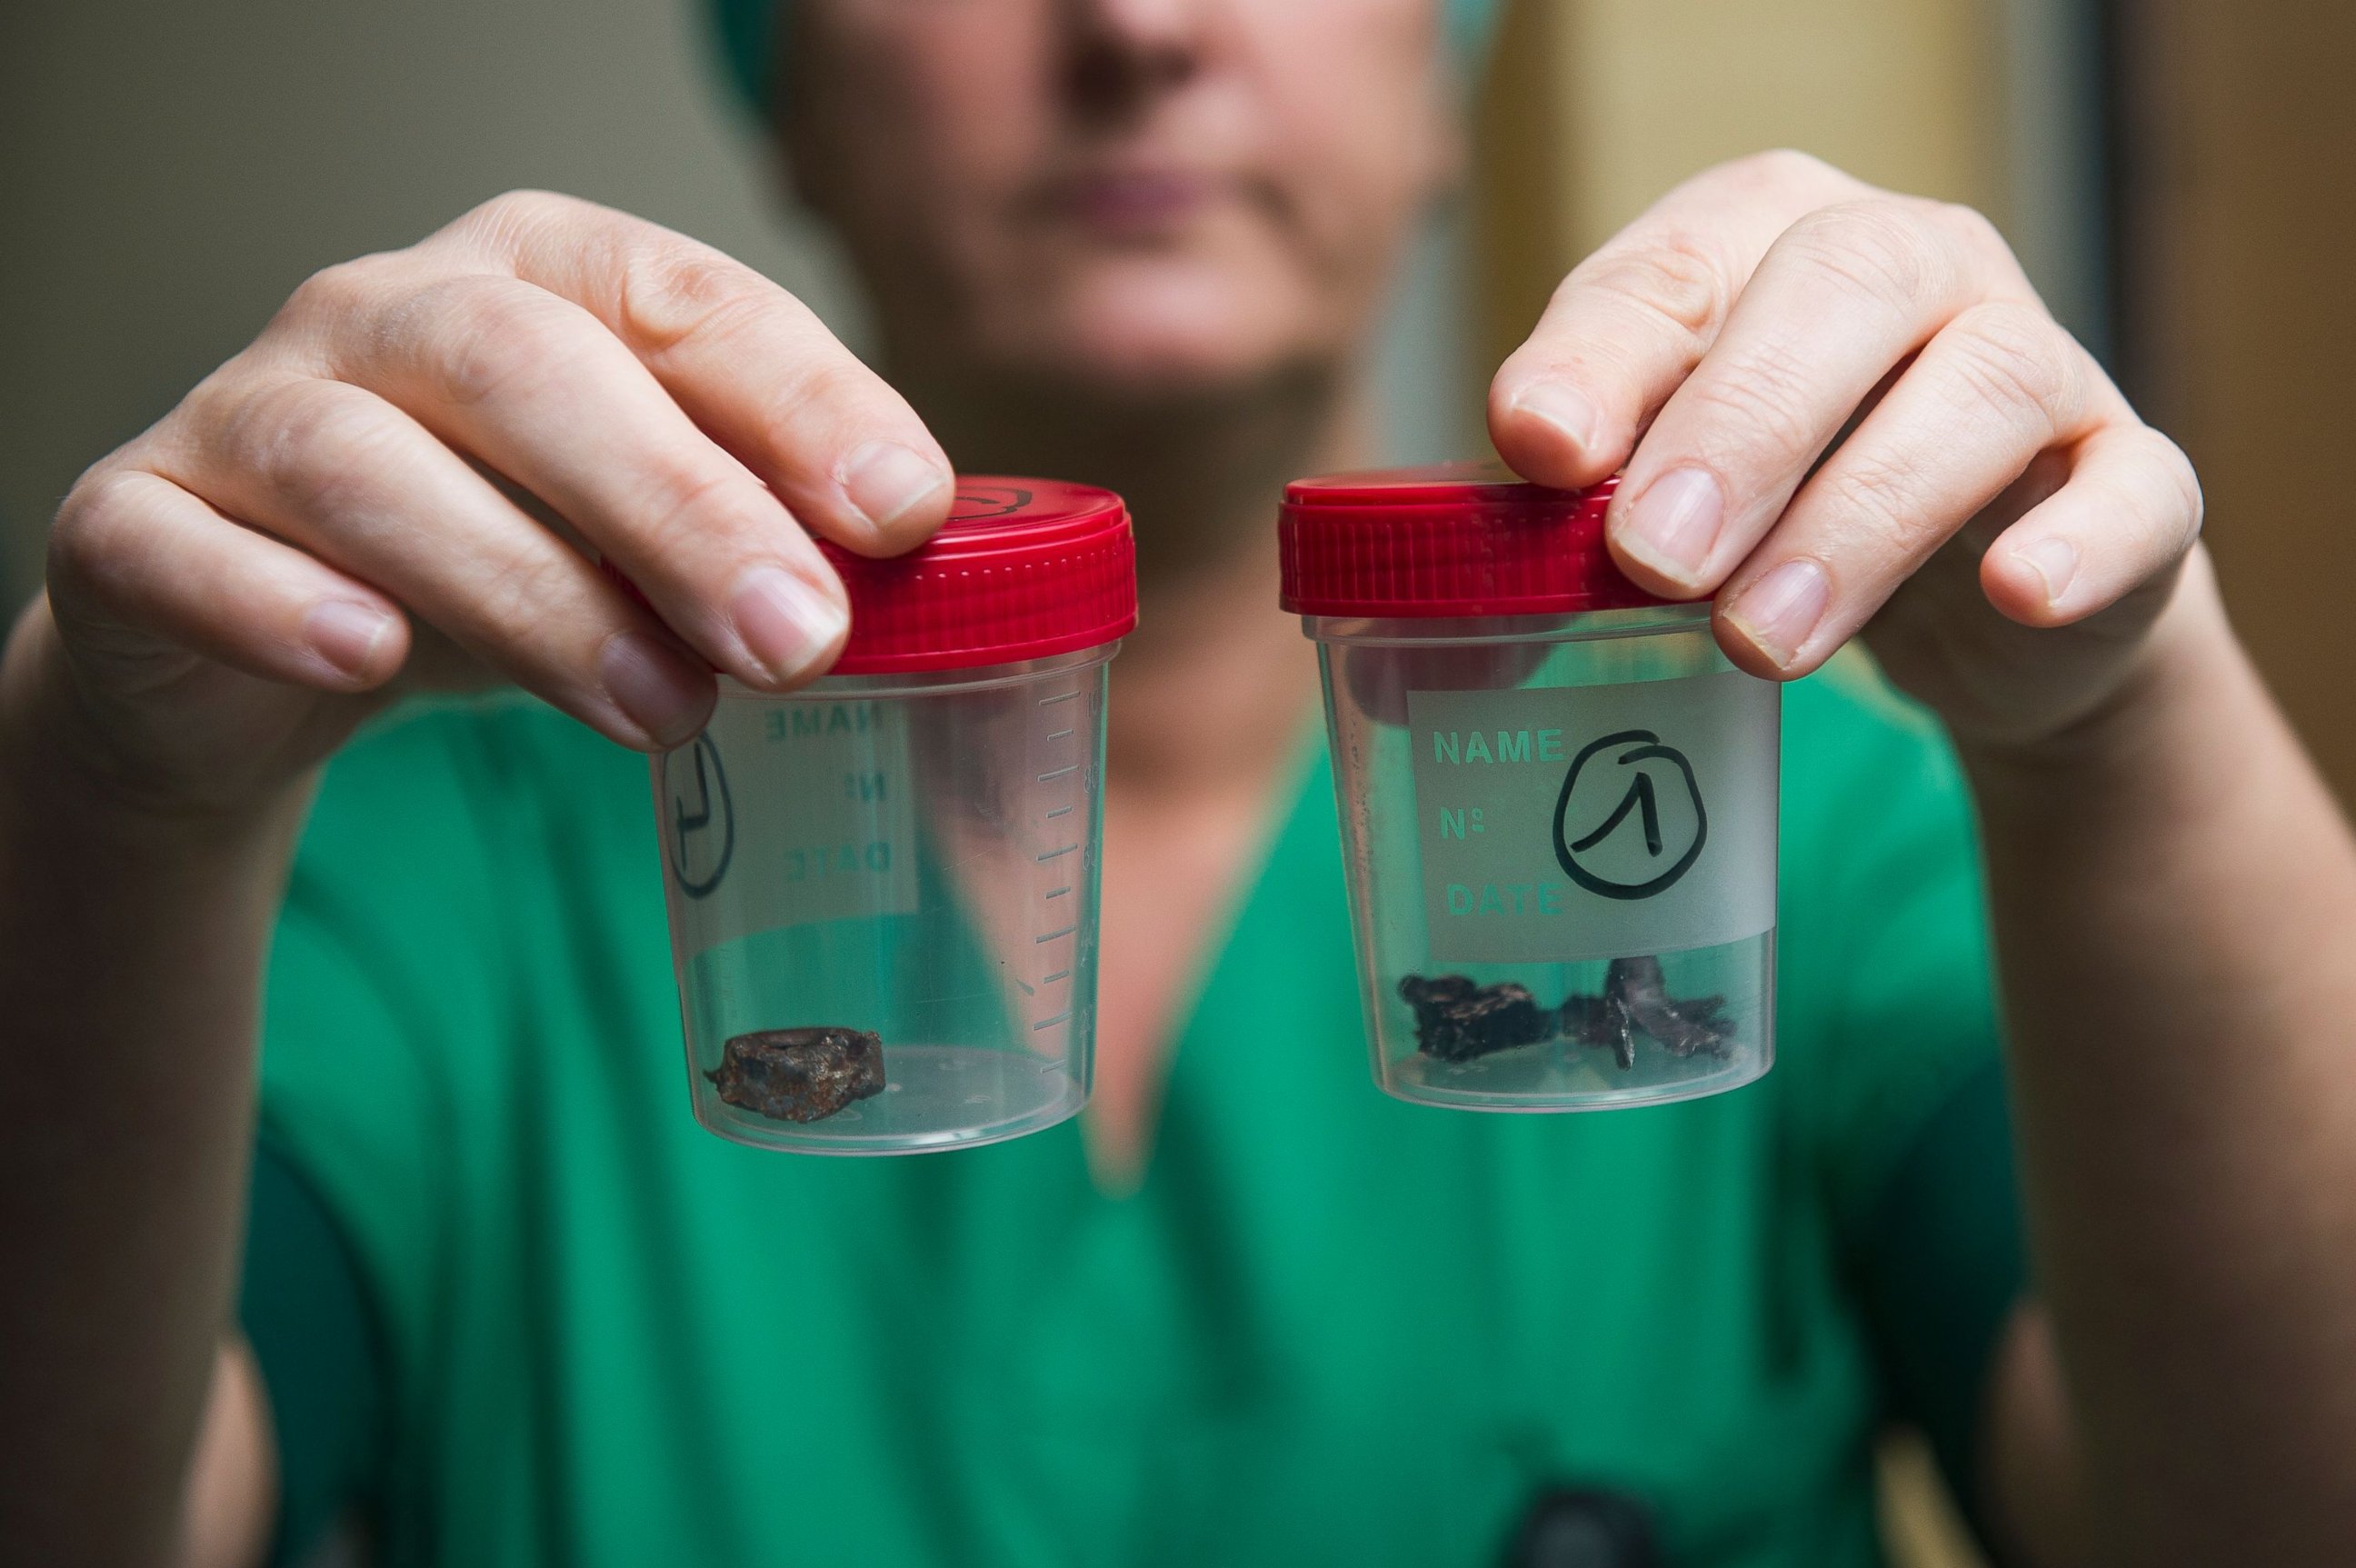 PHOTO: A nurse of the 'Campus Gasthuisberg UZ' hospital in Leuven, Belgium, shows fragments of iron shrapnel from a nail bomb, March 24, 2016.